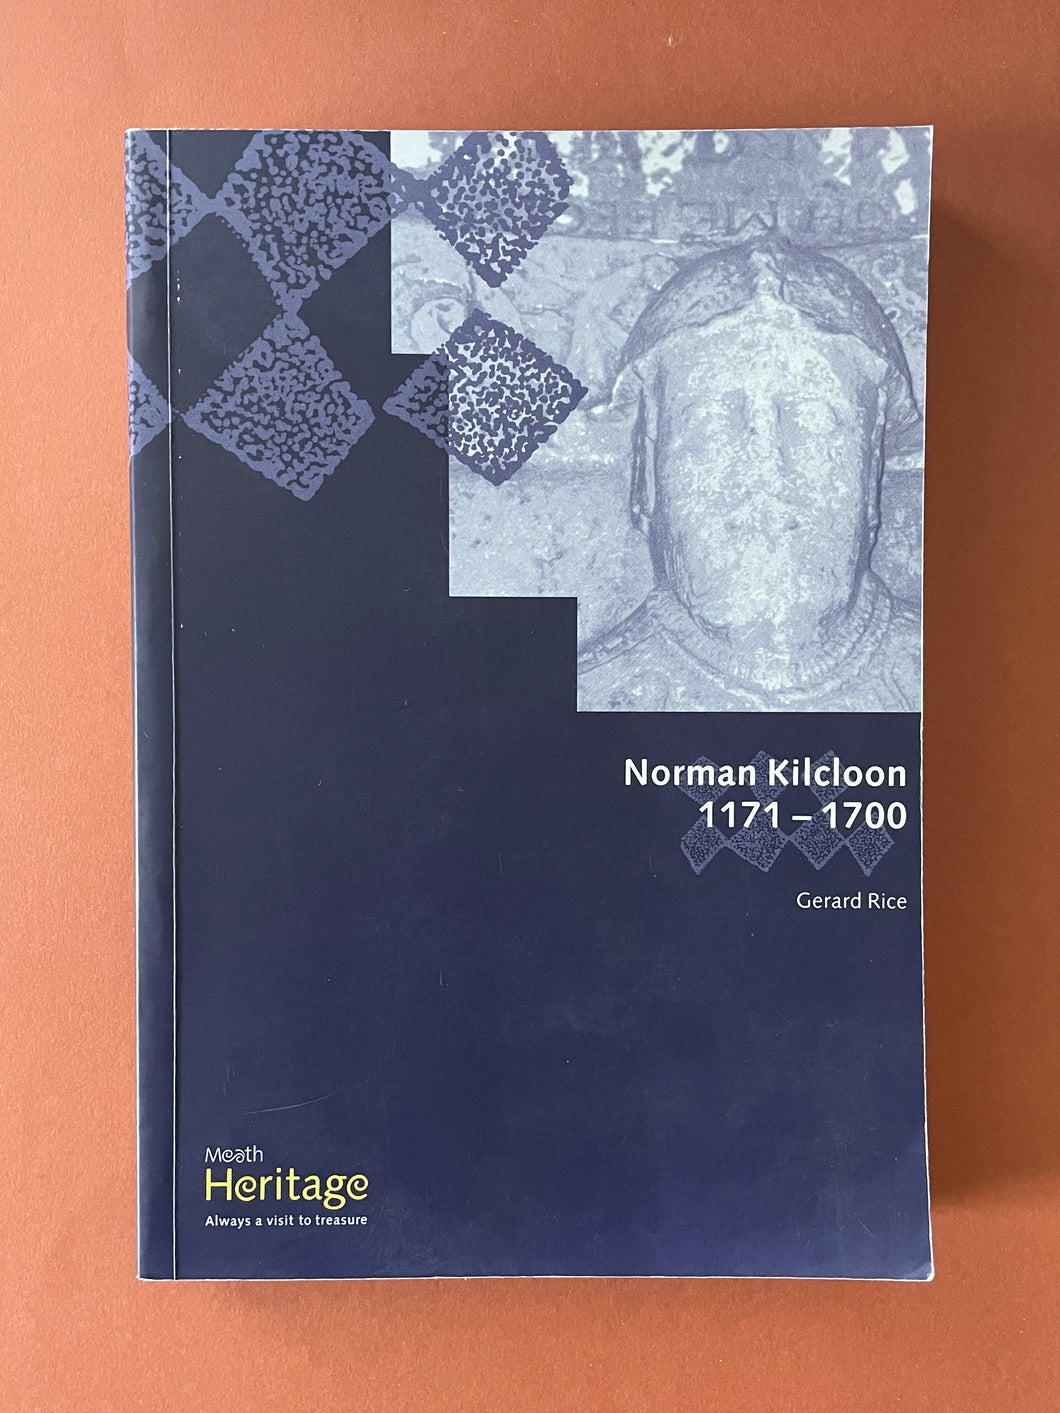 Norman Kilcloon 1171-1700 by Gerard Rice: photo of the front cover which shows minor scuff marks and scratches.